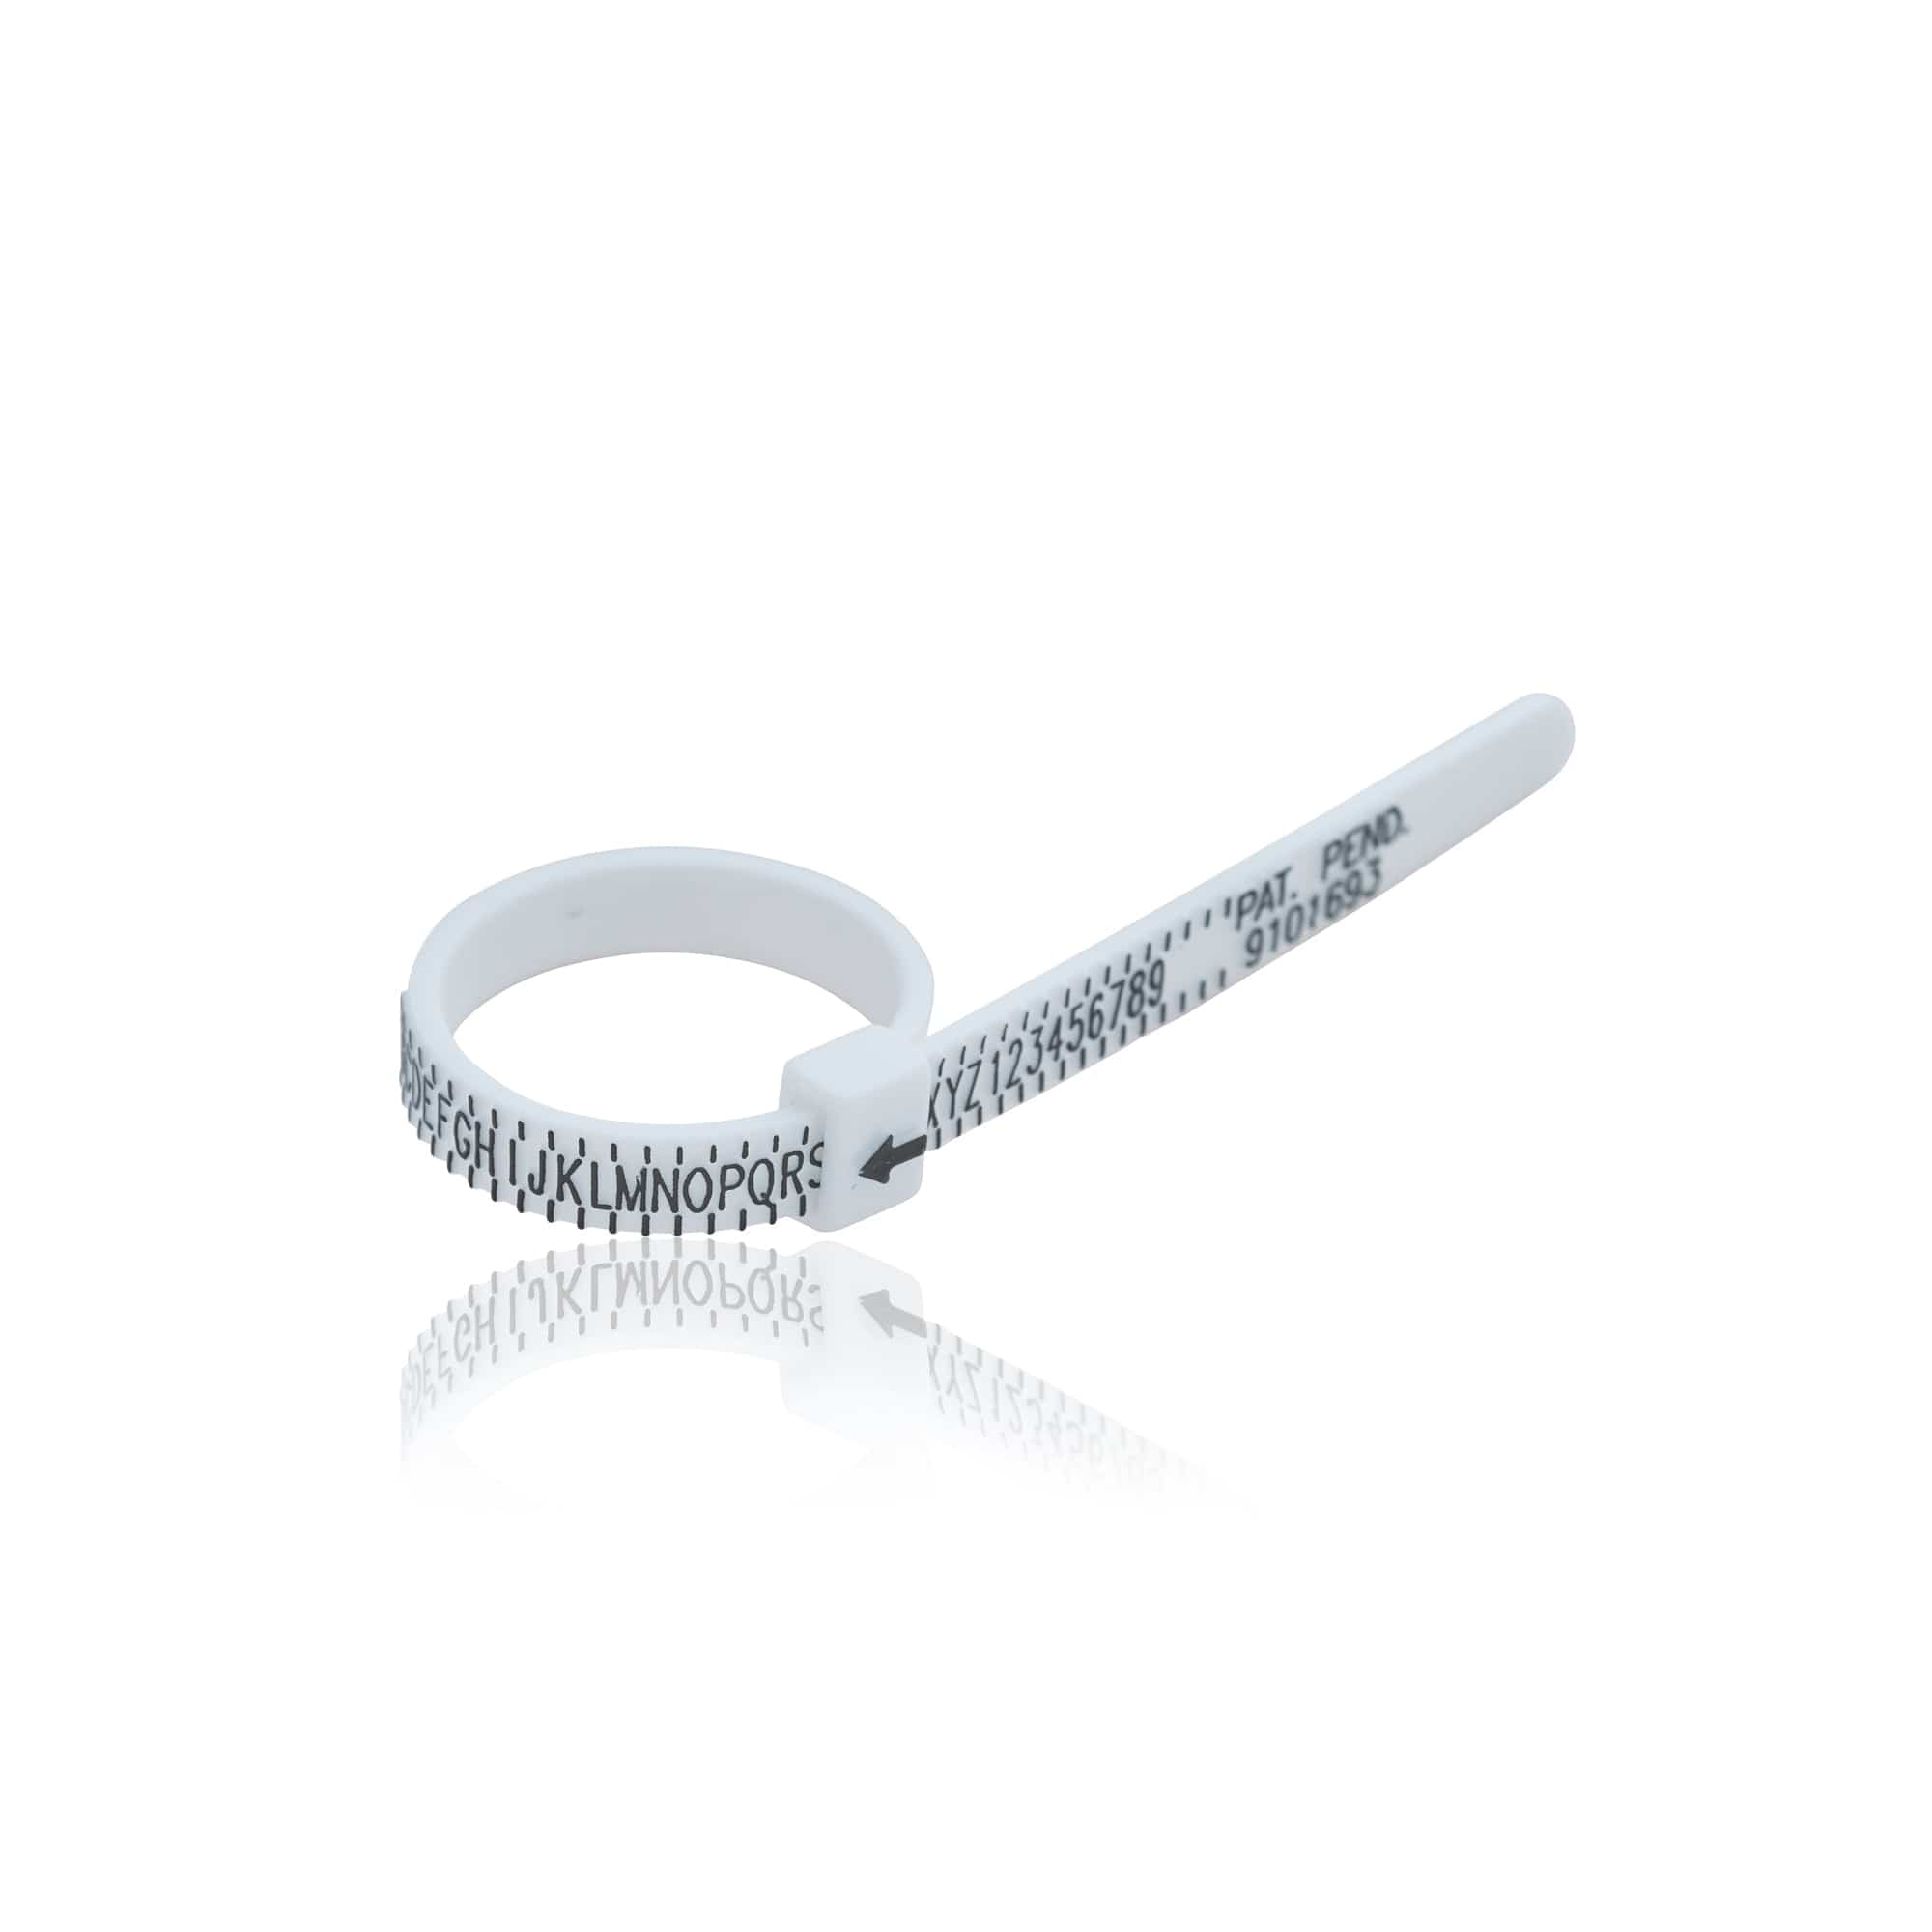 Snap-Out Plastic Ring Sizer | 35.0895 - Yu Yo The Artists' Place Inc.